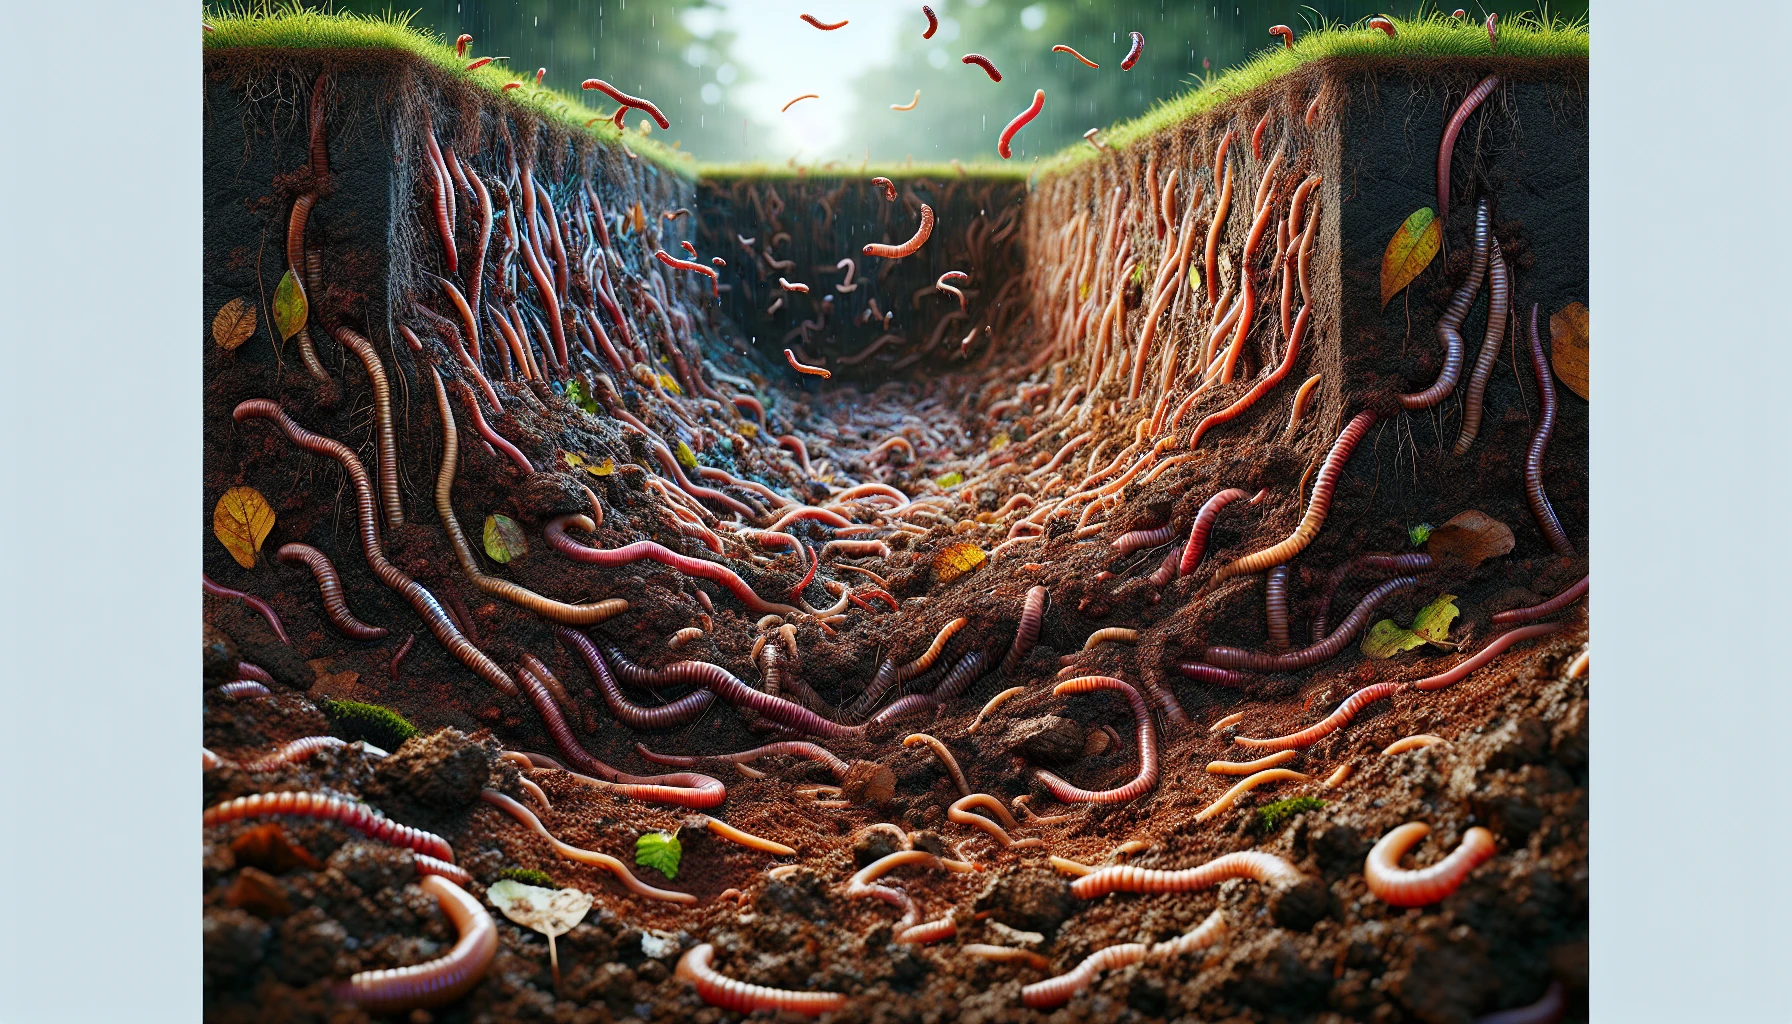 Earthworms aerating and enriching the soil